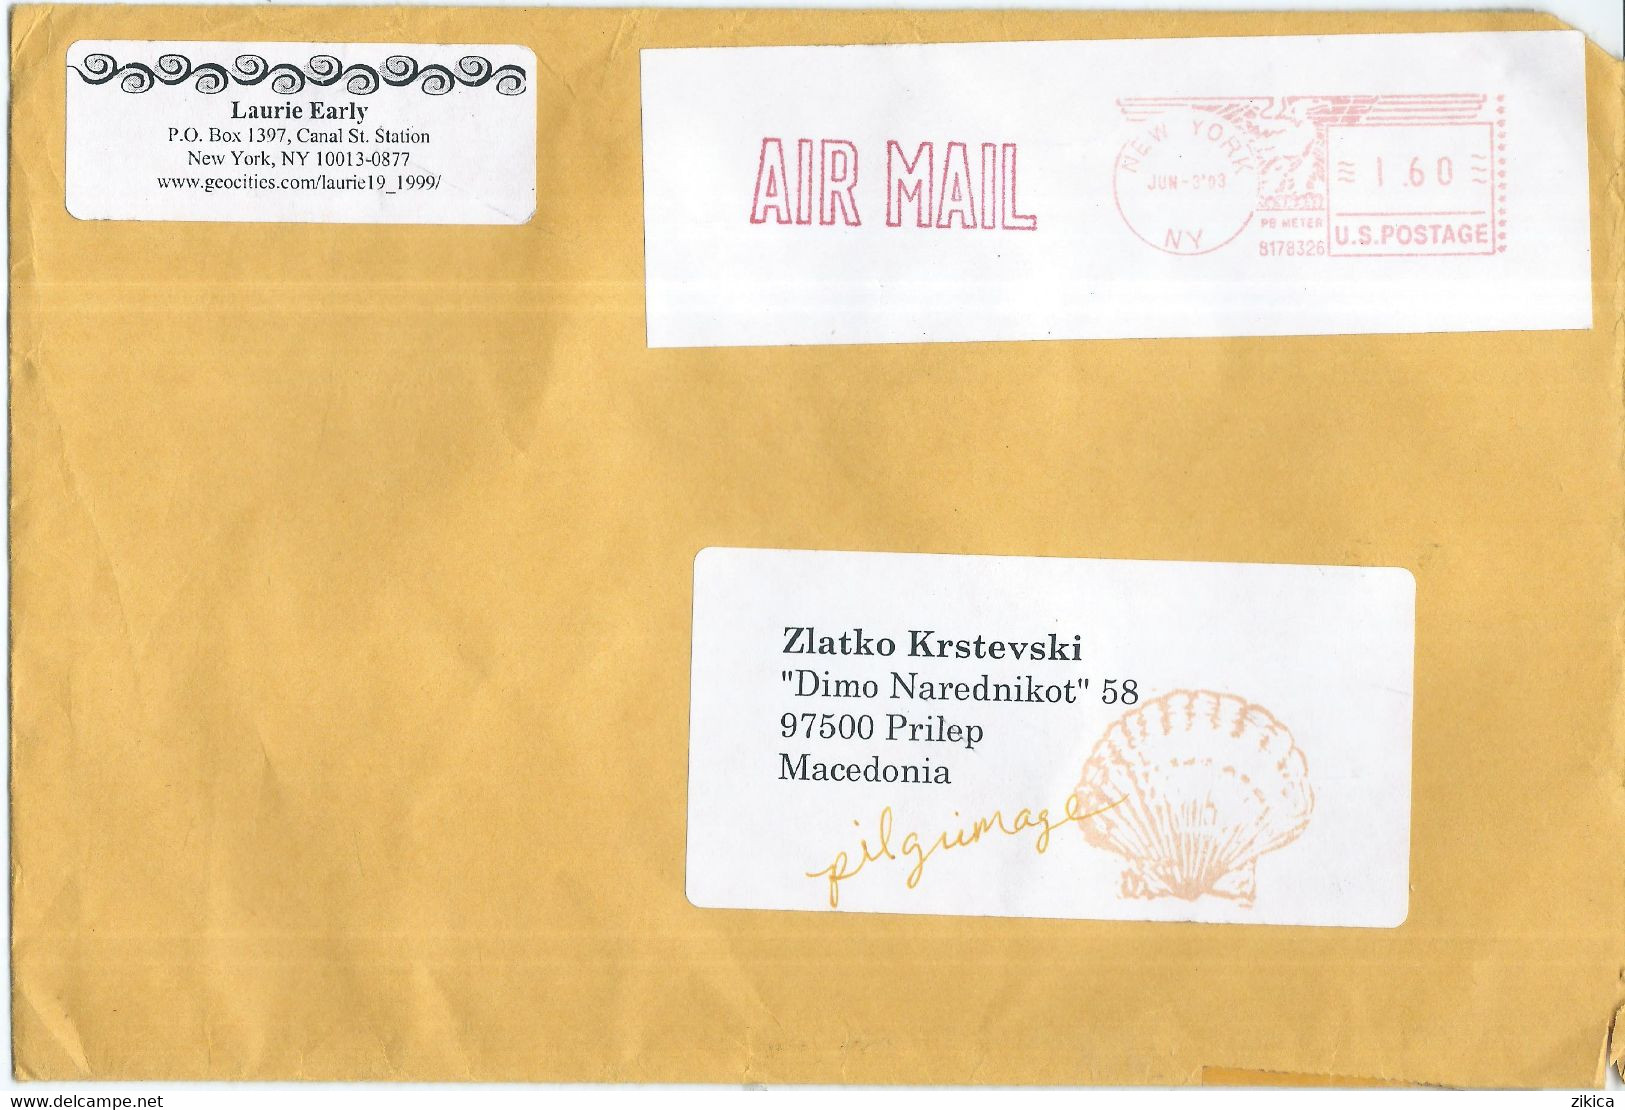 United States - BIG Cover MAIL  ART ( Shell ) 2003 Via Macedonia,stamps :post Label New York Air Mail - Covers & Documents